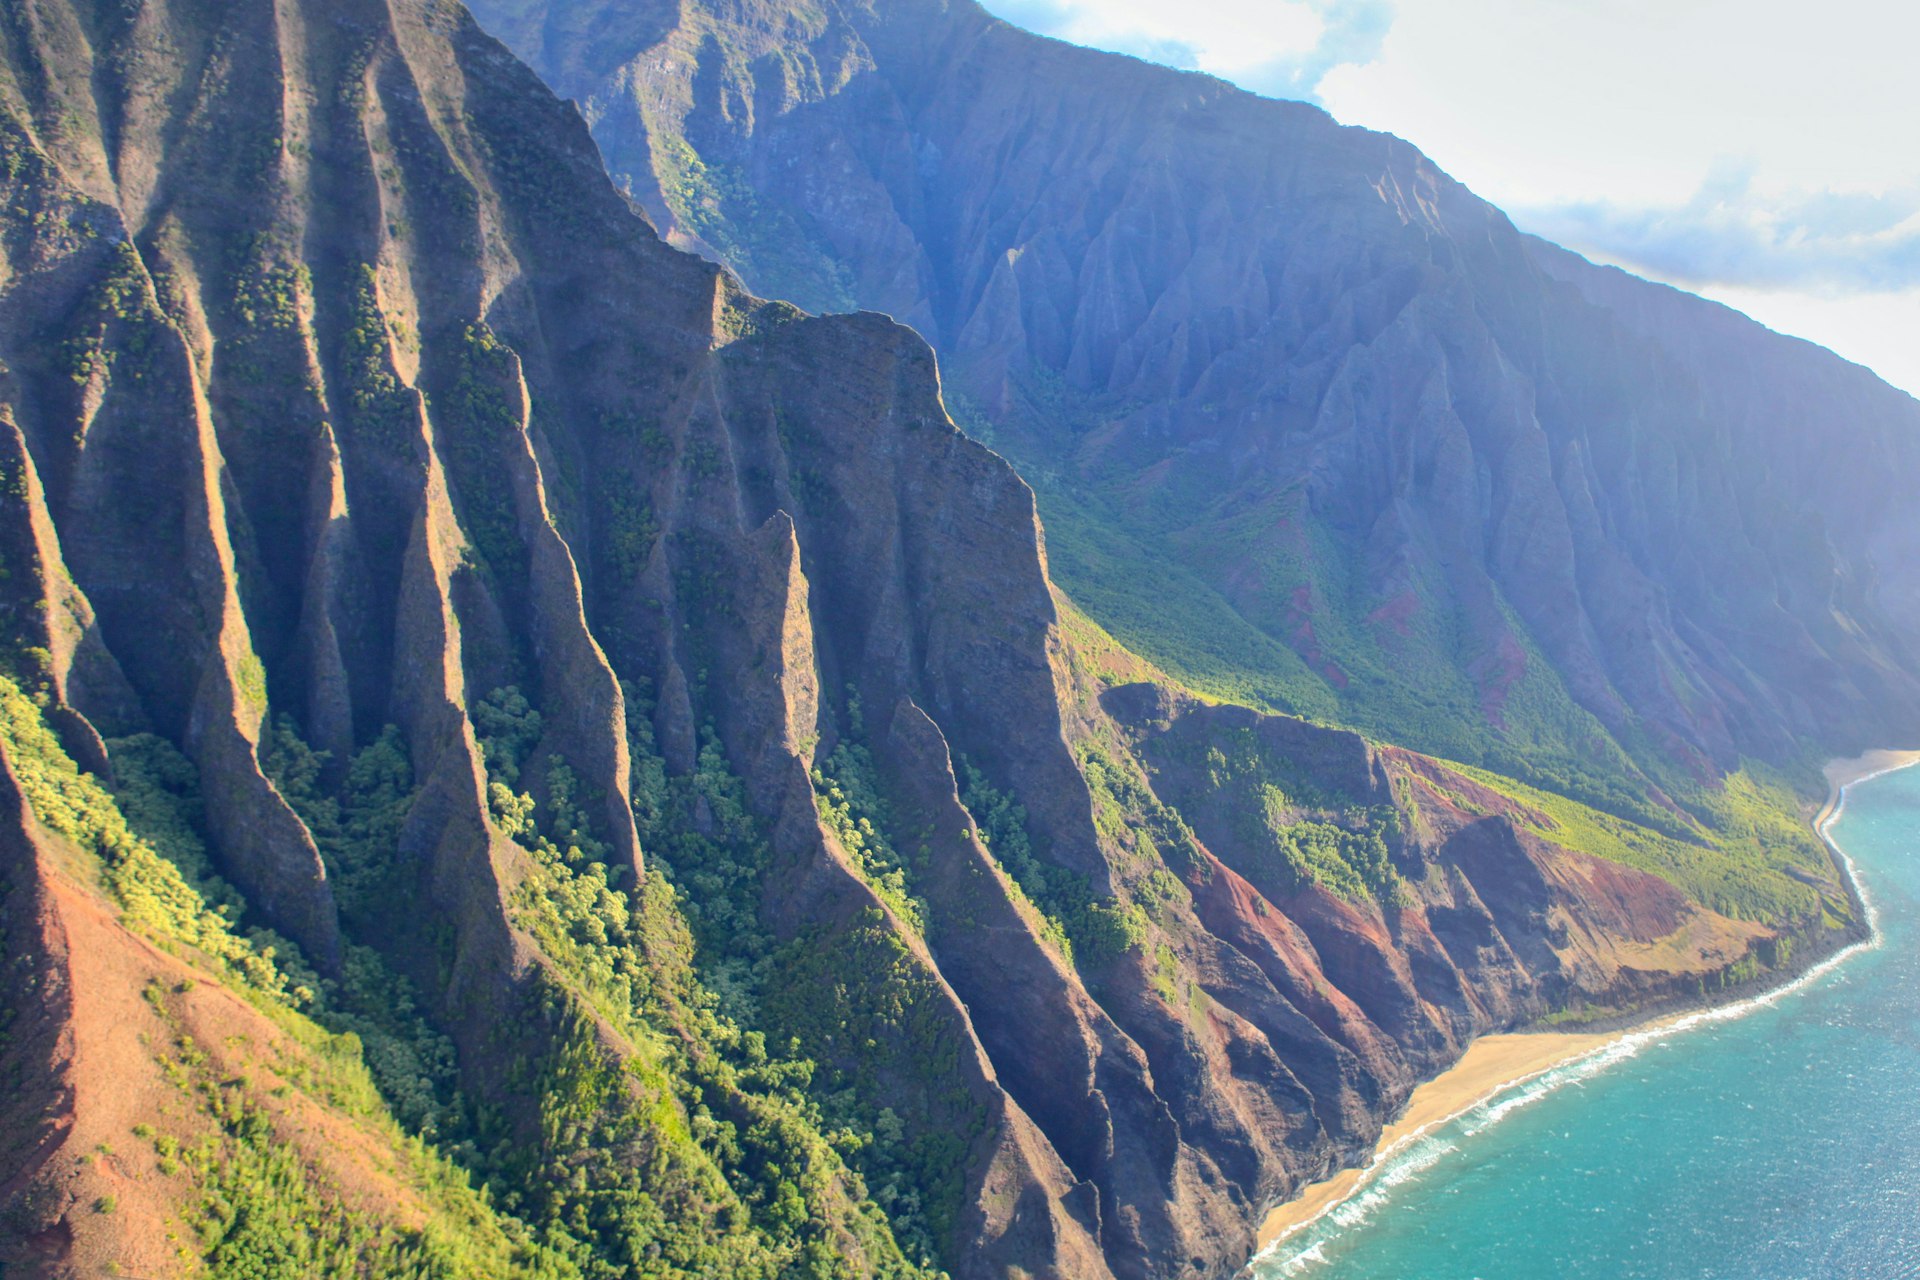 The Na Pali Coast was featured in The Lost World: Jurassic Park. Image by  M.M. Sweet / Getty